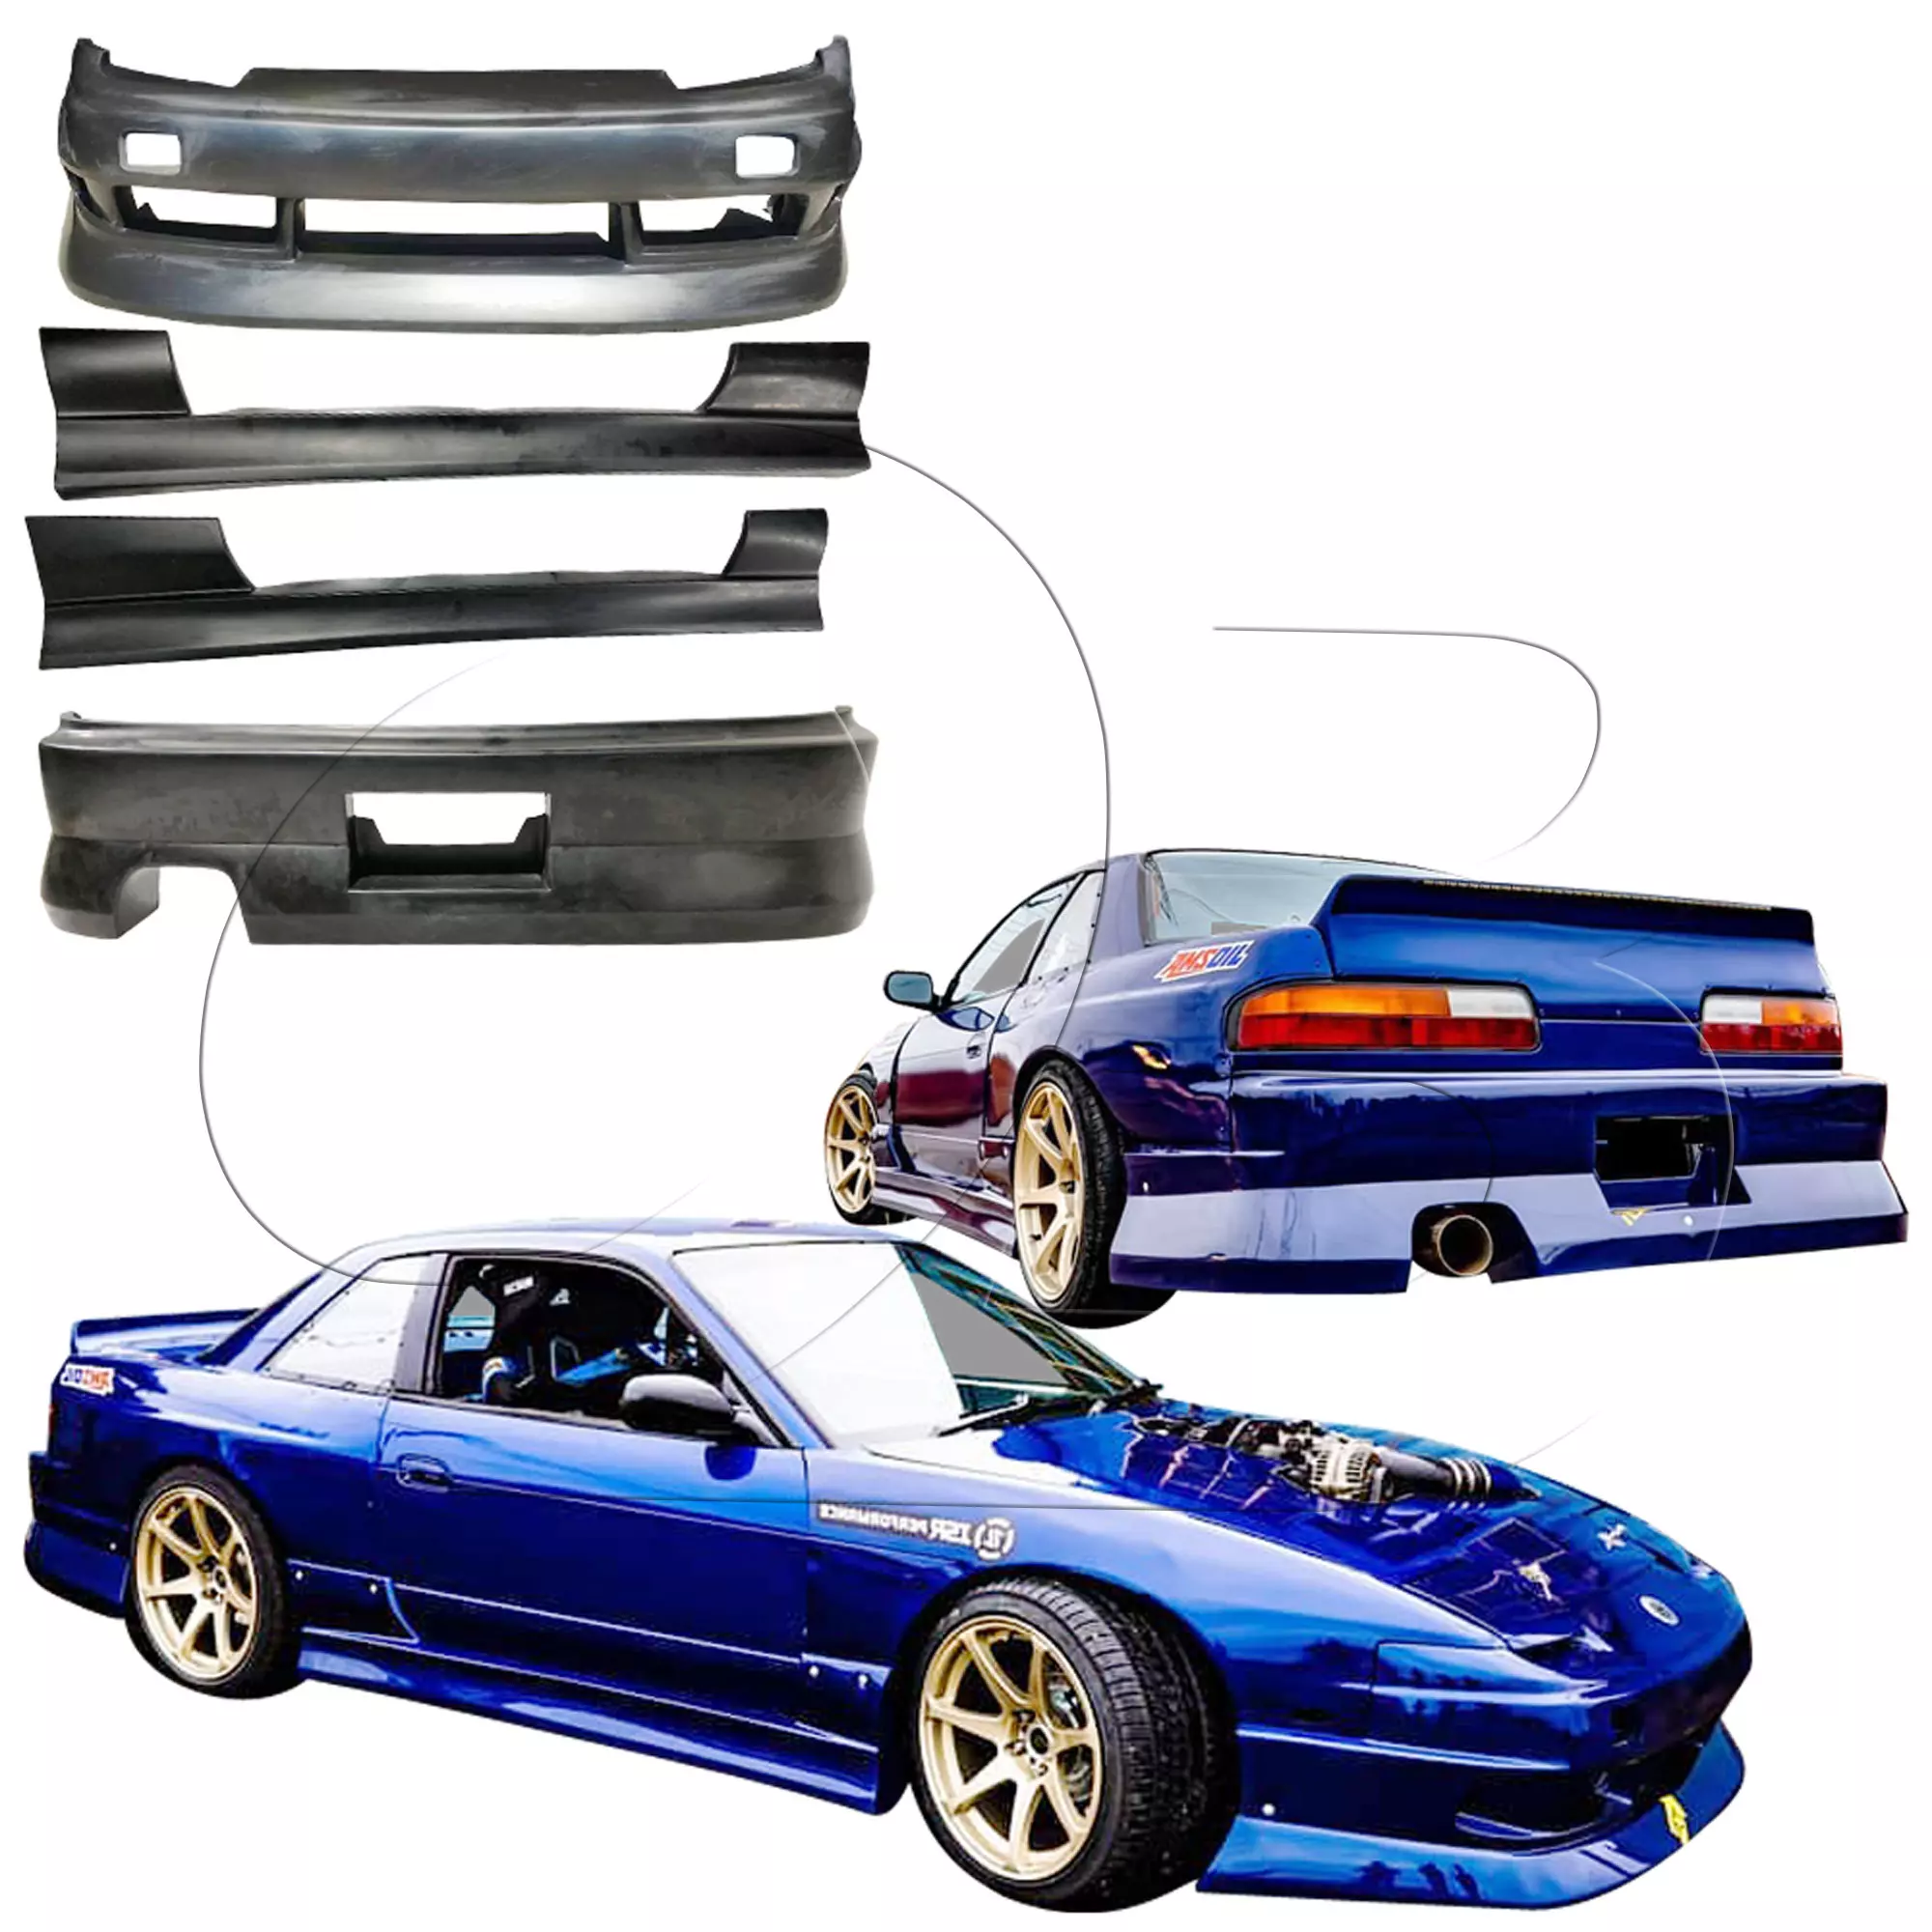 KBD Urethane Bsport2 Style 4pc Full Body Kit > Nissan 240SX 1989-1994 > 2dr Coupe - Image 3